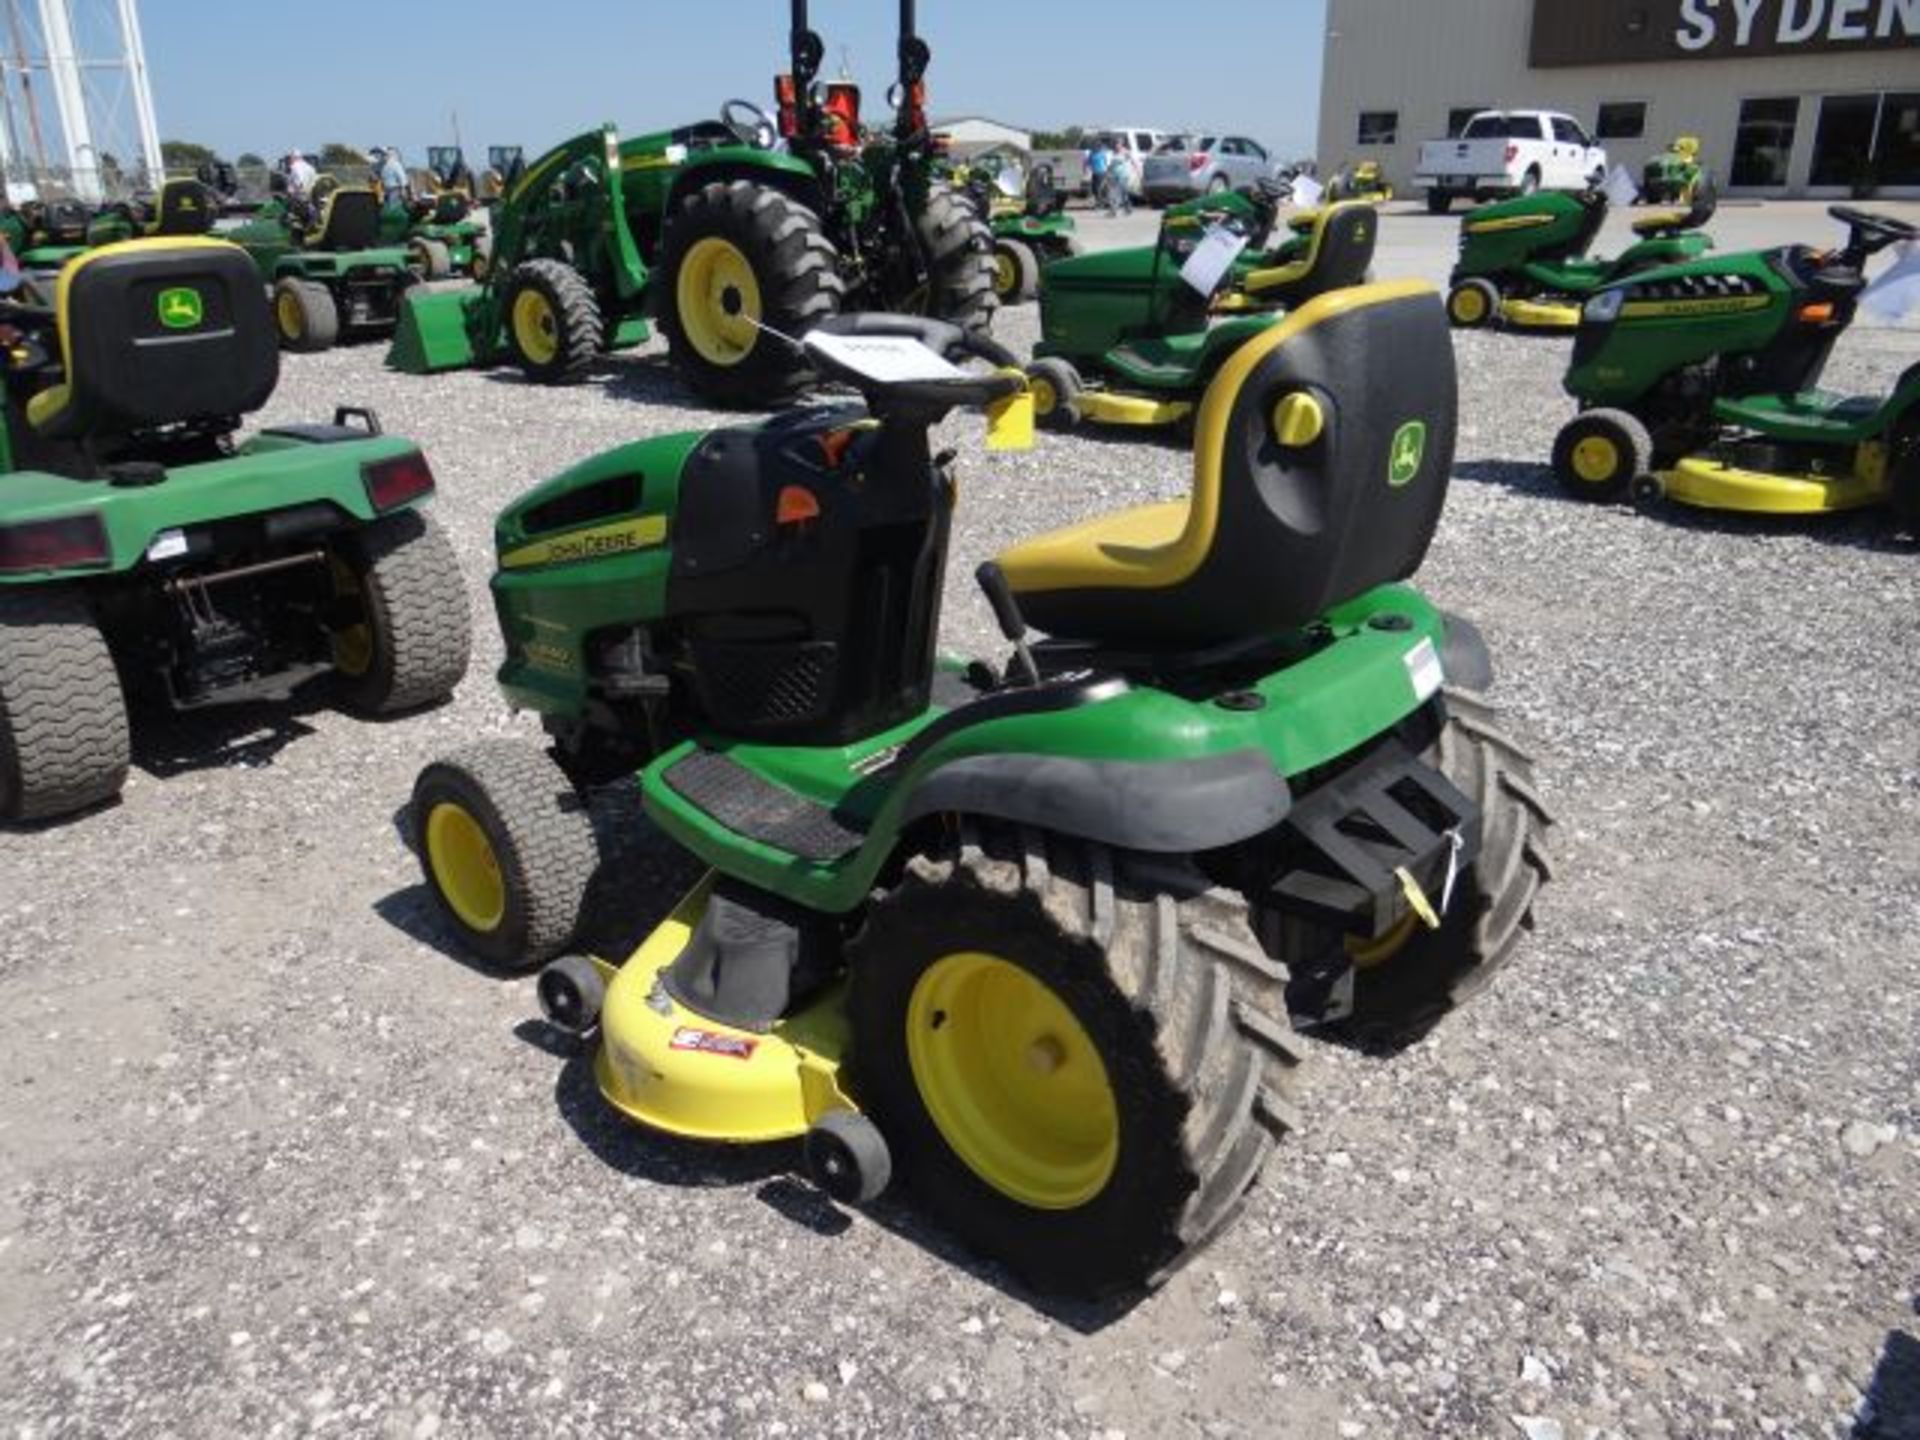 2007 JD LA140 Mower 164 hrs, 23hp Briggs, V-Twin, Air Cooled, Hydro, Transmission Weak, Salvage